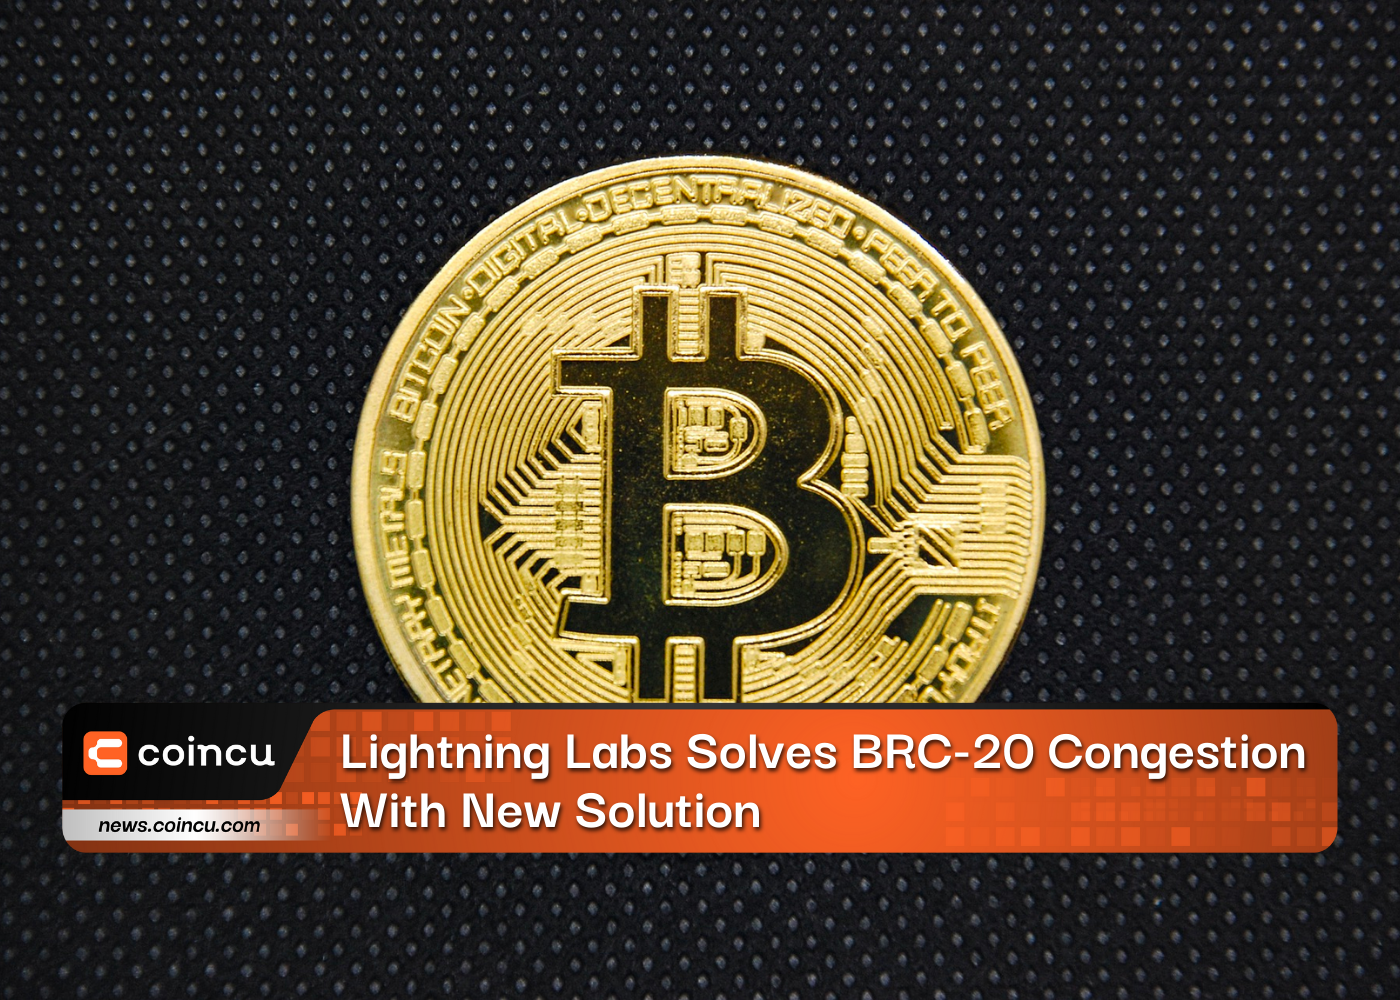 Lightning Labs Solves BRC-20 Congestion With New Solution